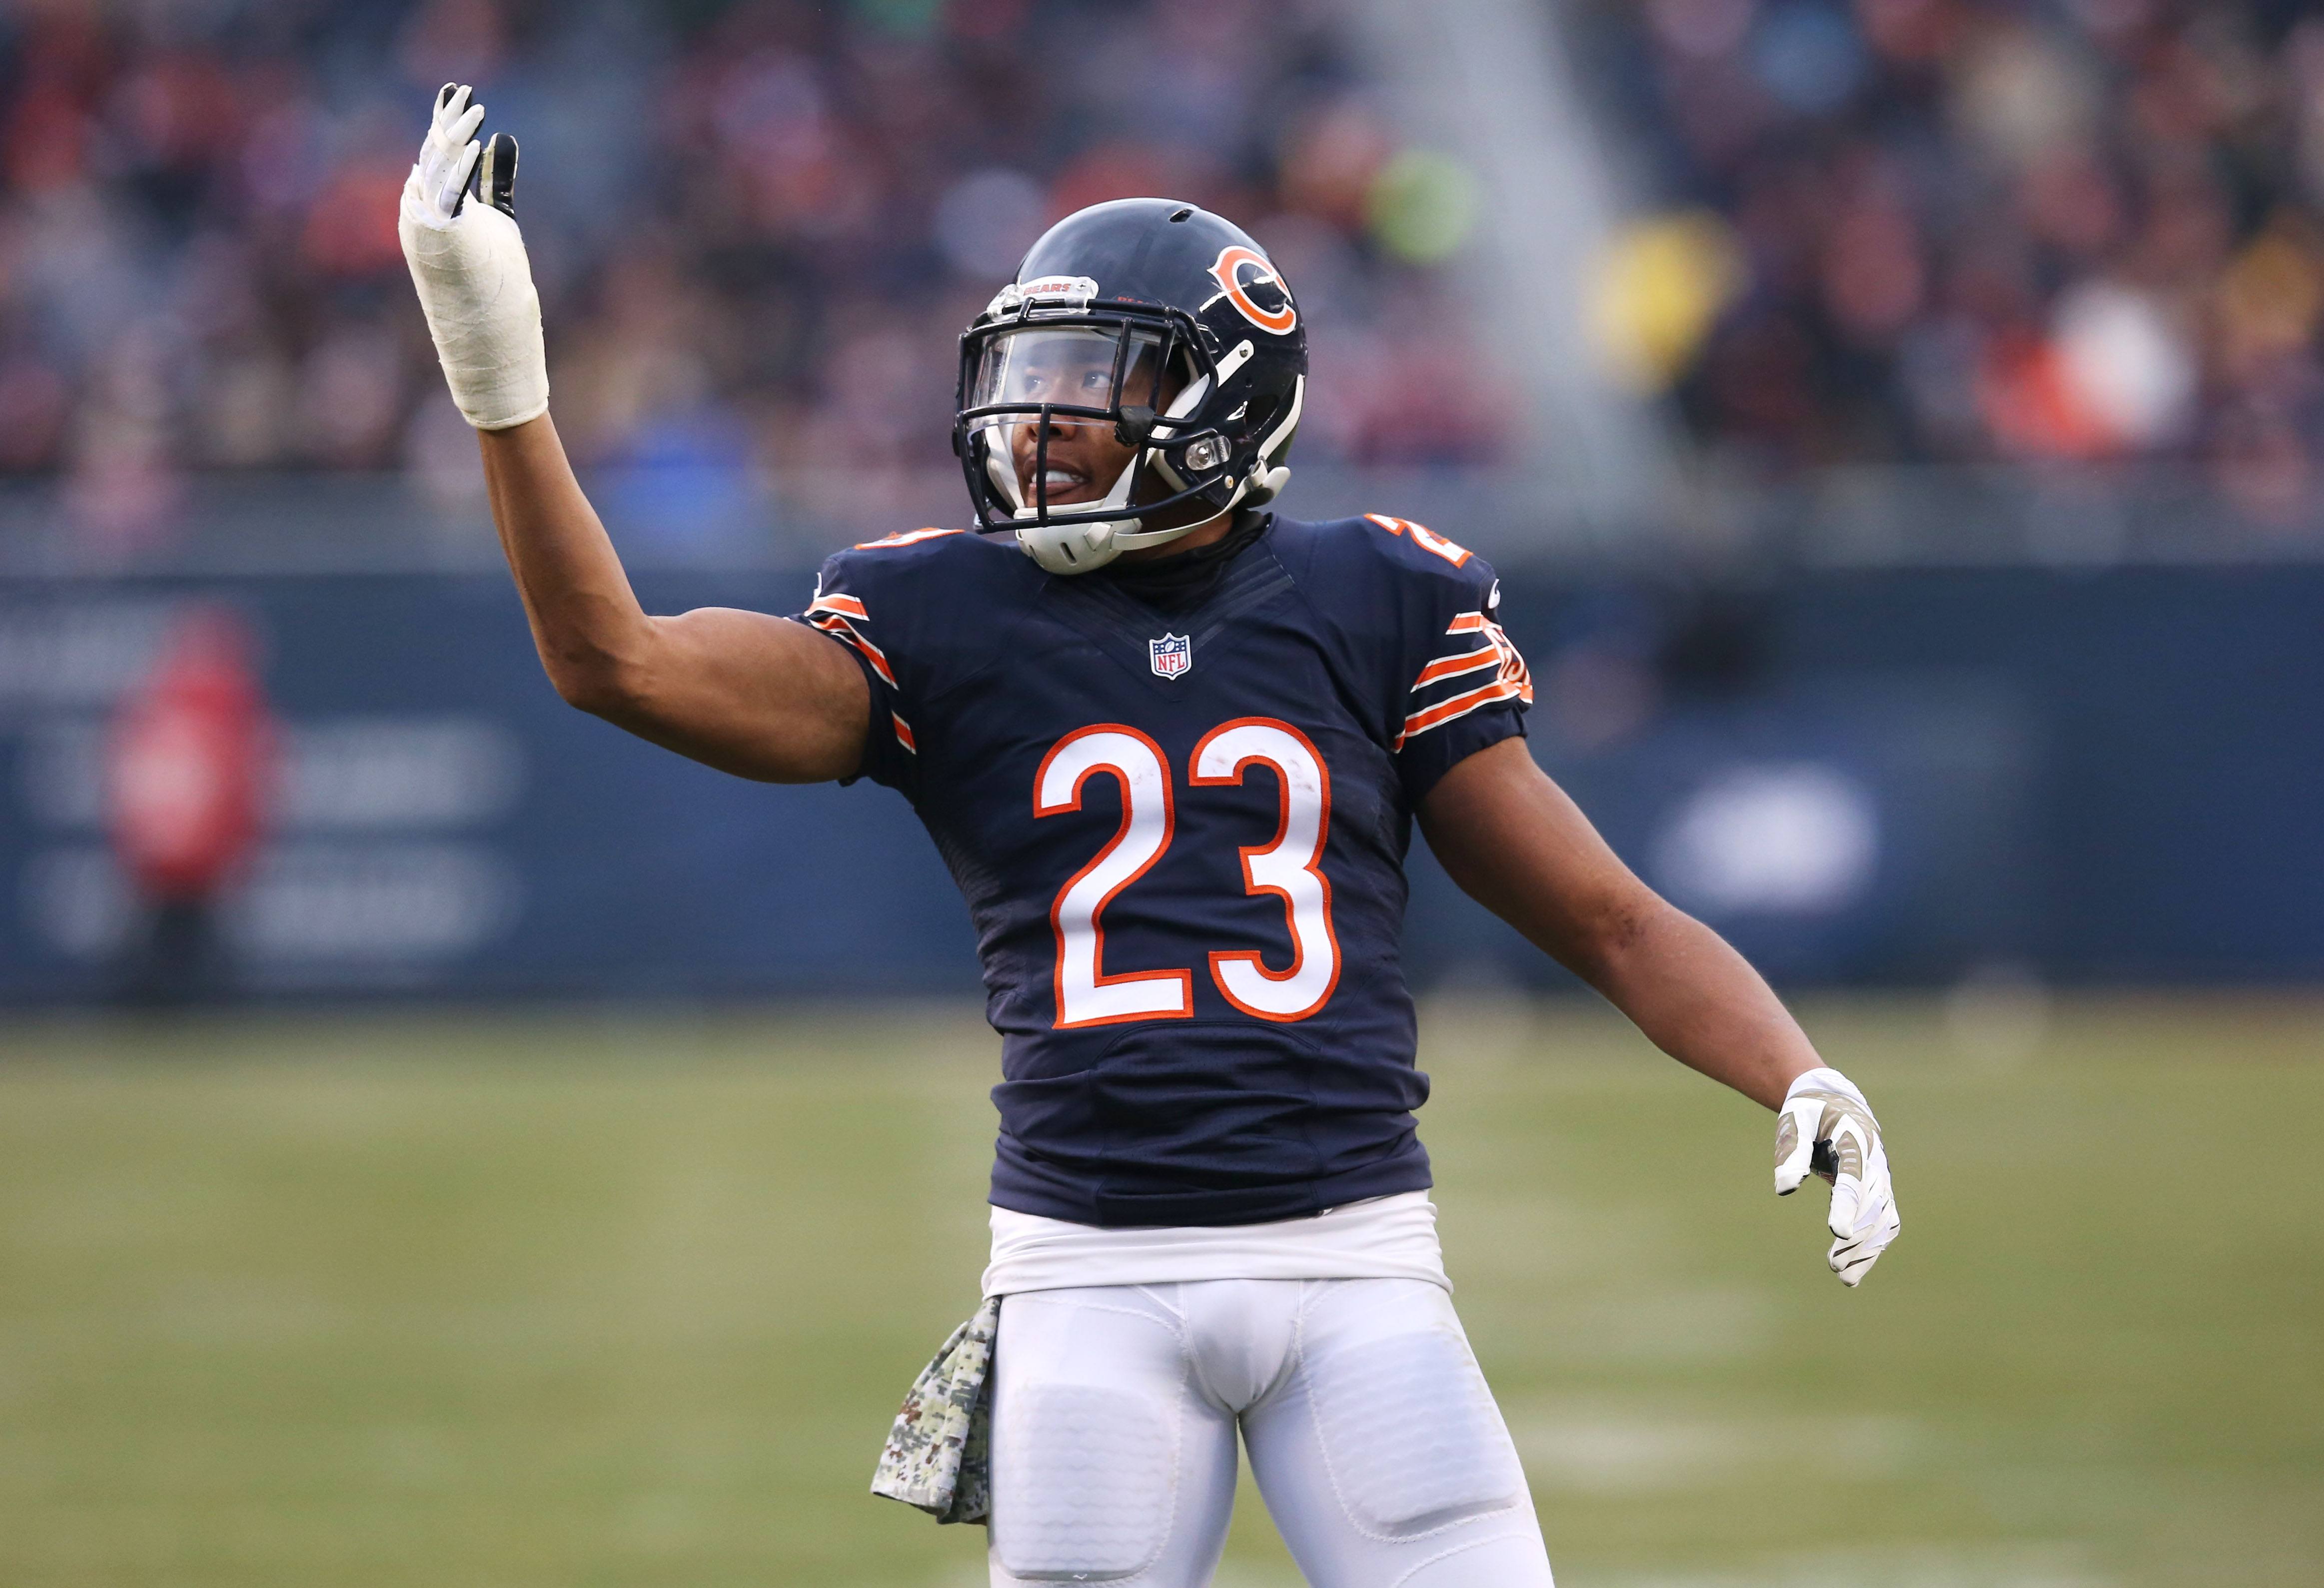 Kyle Fuller #23 of the Chicago Bears fires up the fans.